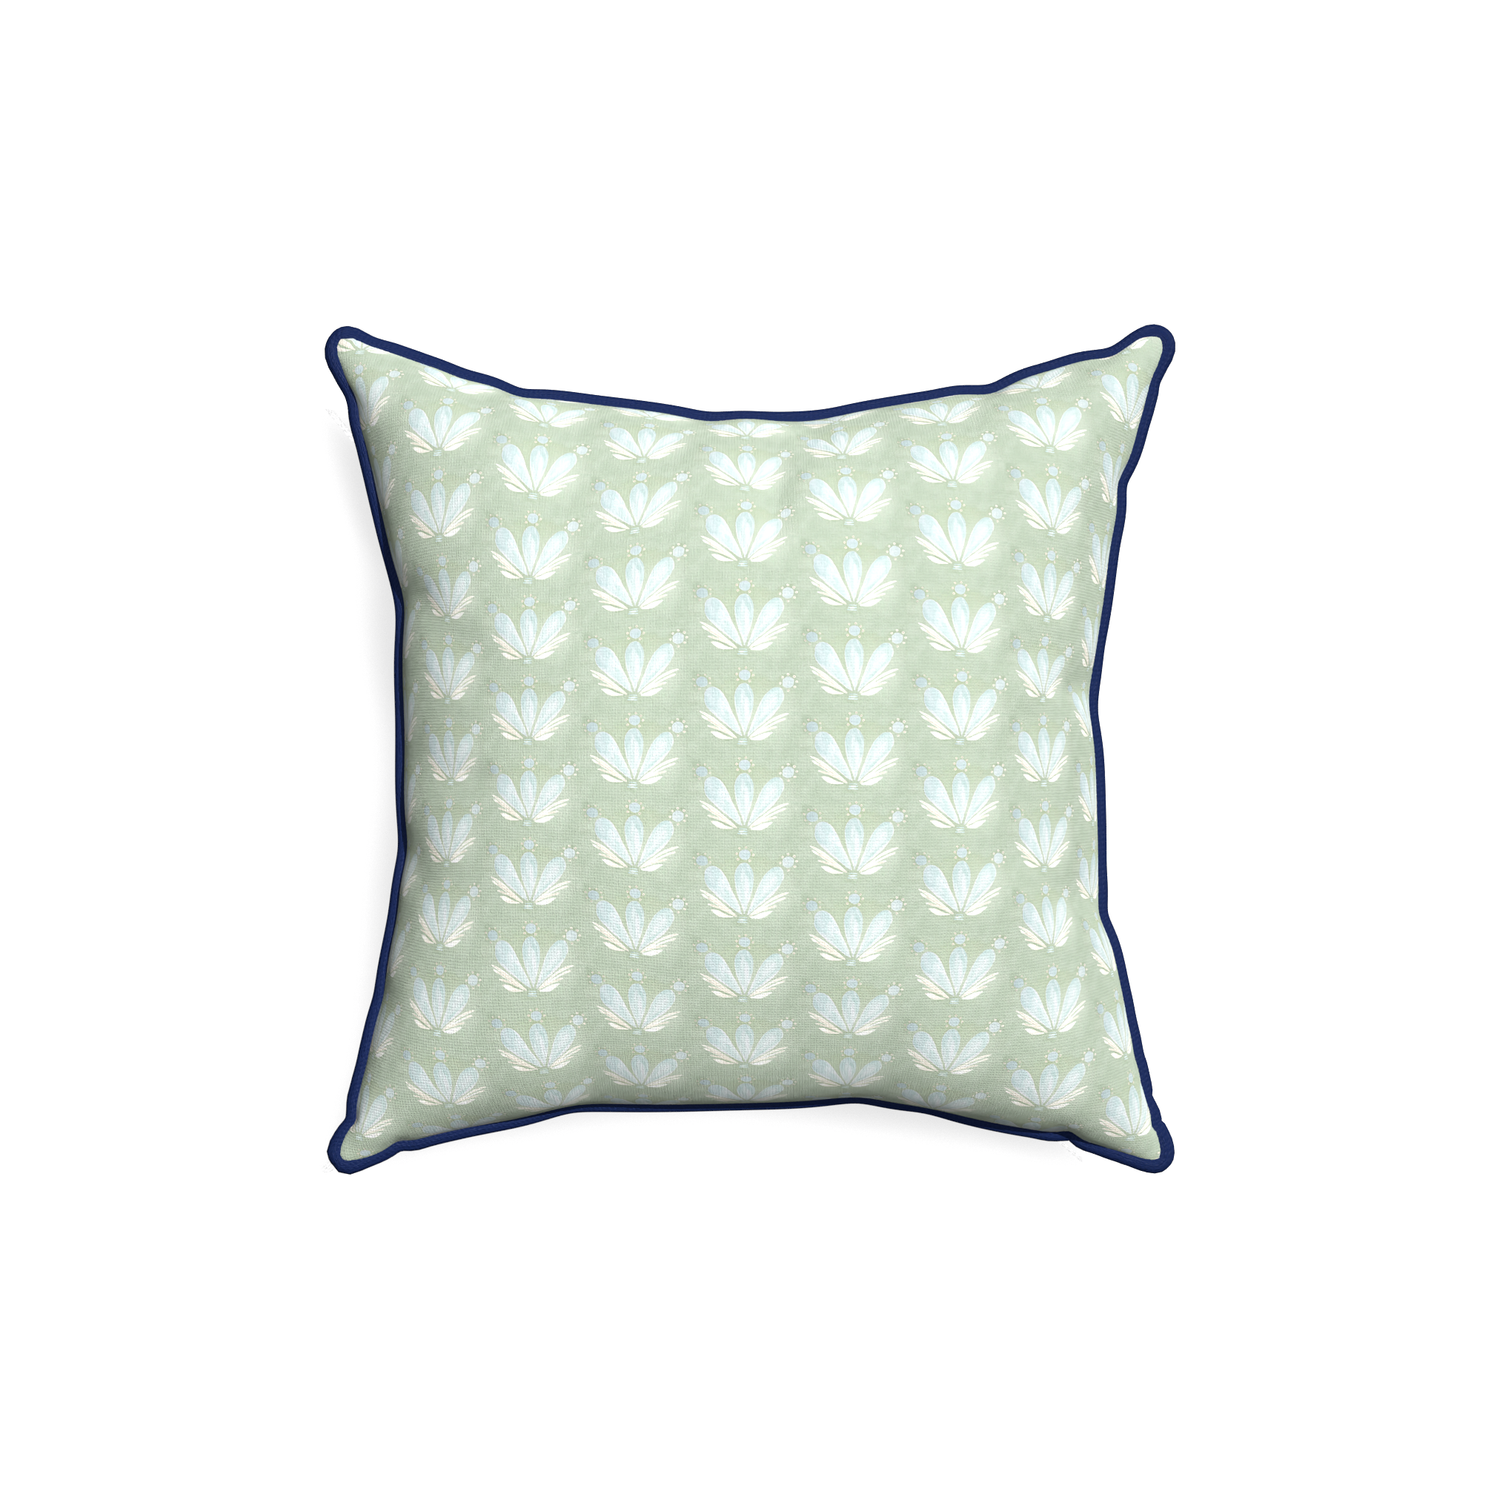 18-square serena sea salt custom blue & green floral drop repeatpillow with midnight piping on white background